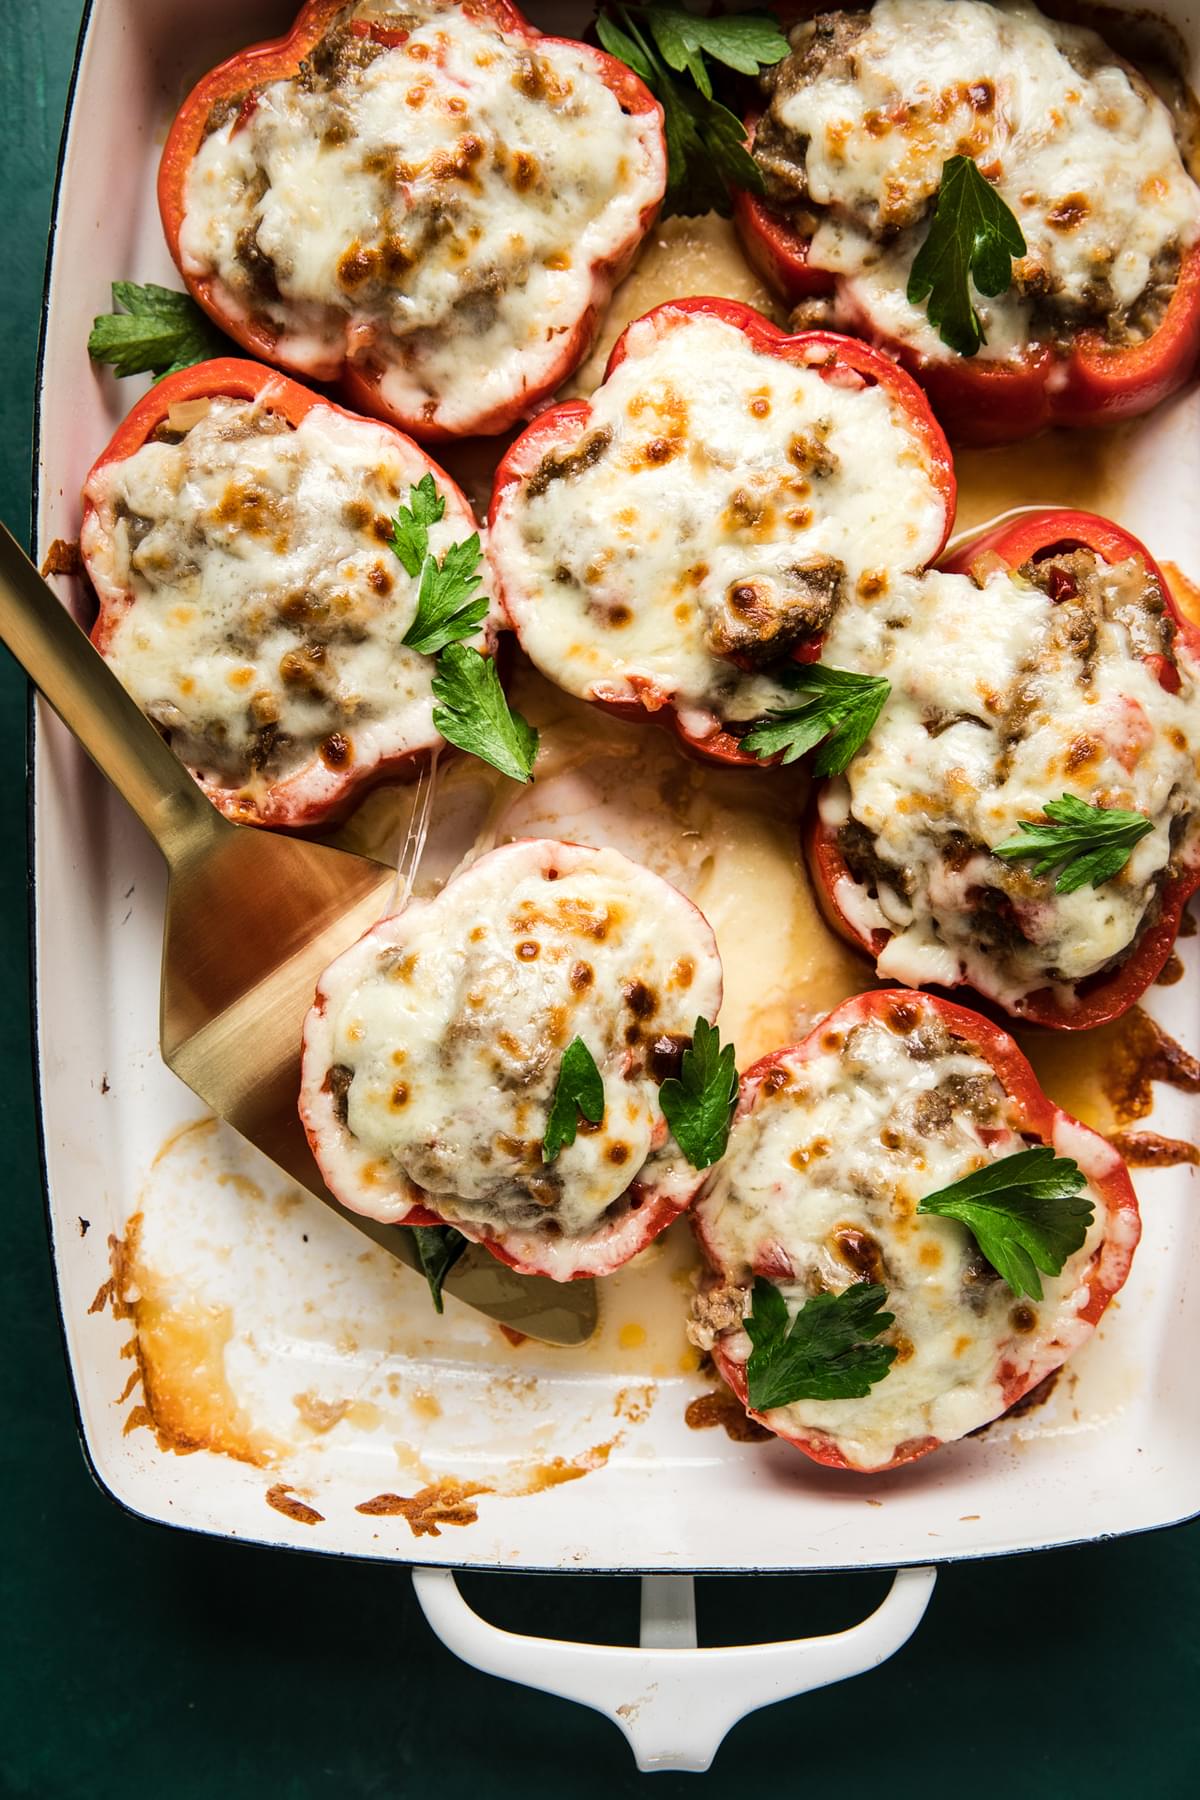 Homemade Stuffed Peppers topped with melted cheese and parsley garnish in a baking dish